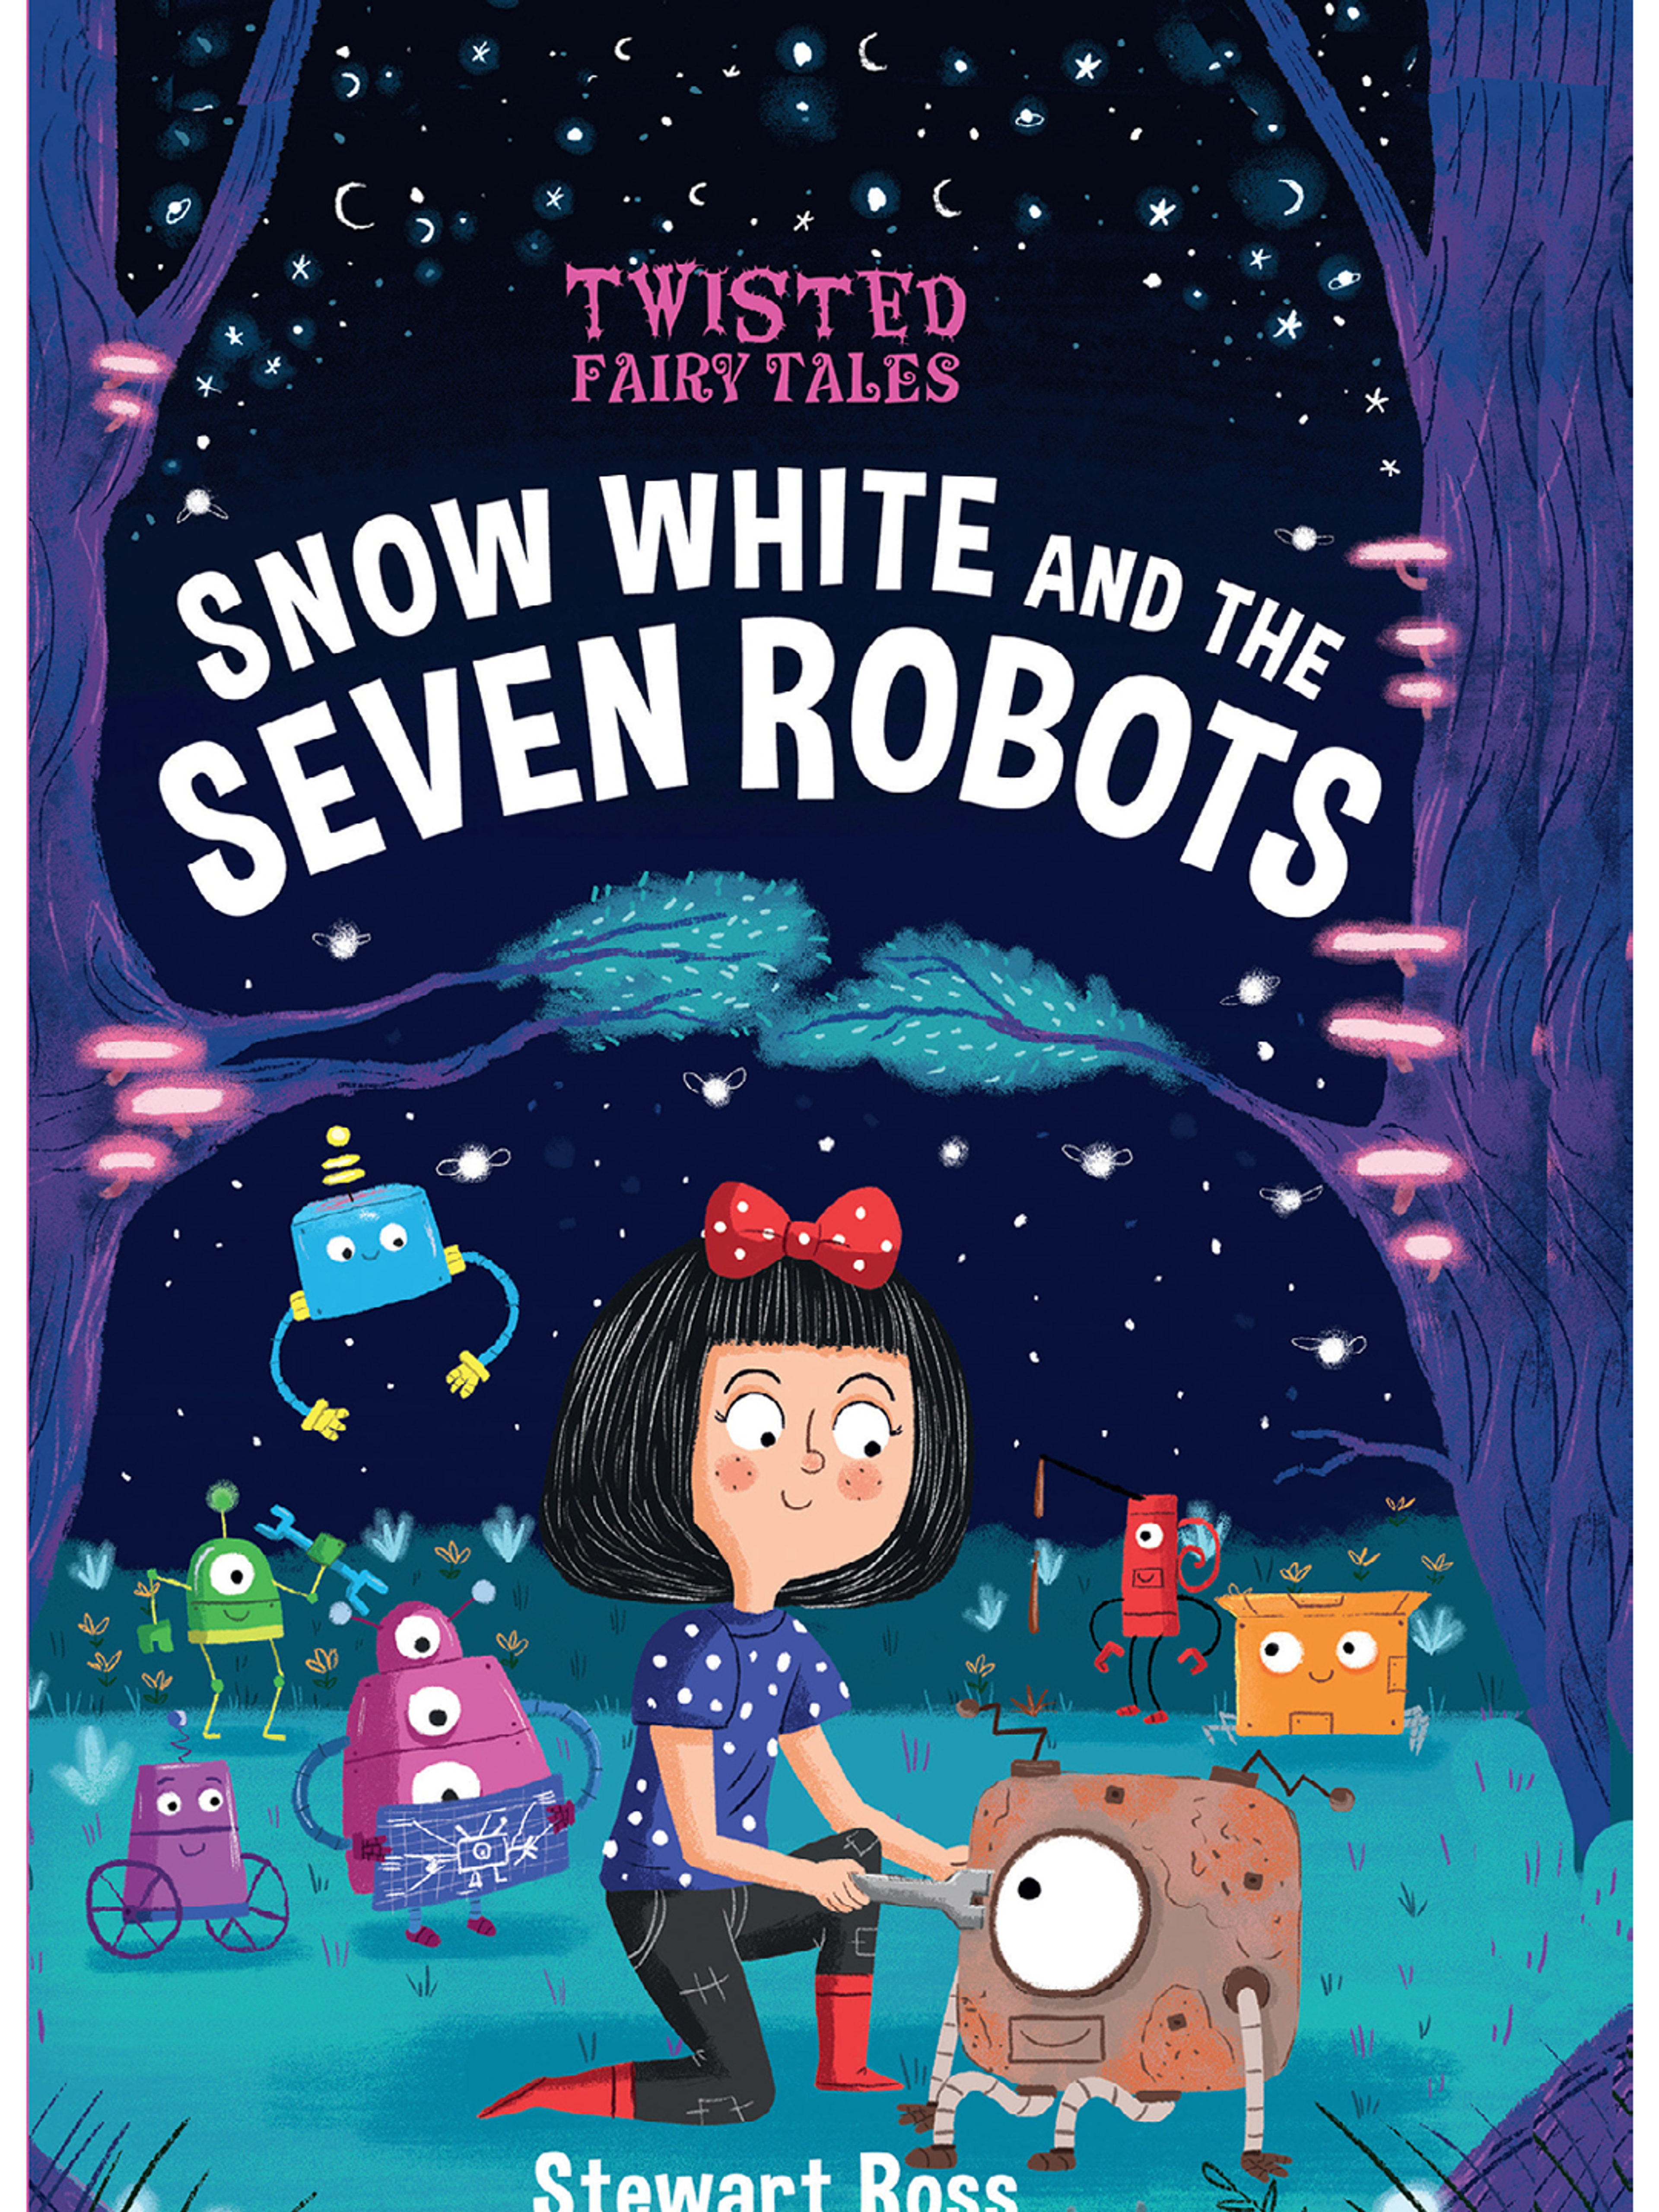 Snow white and the seven robots